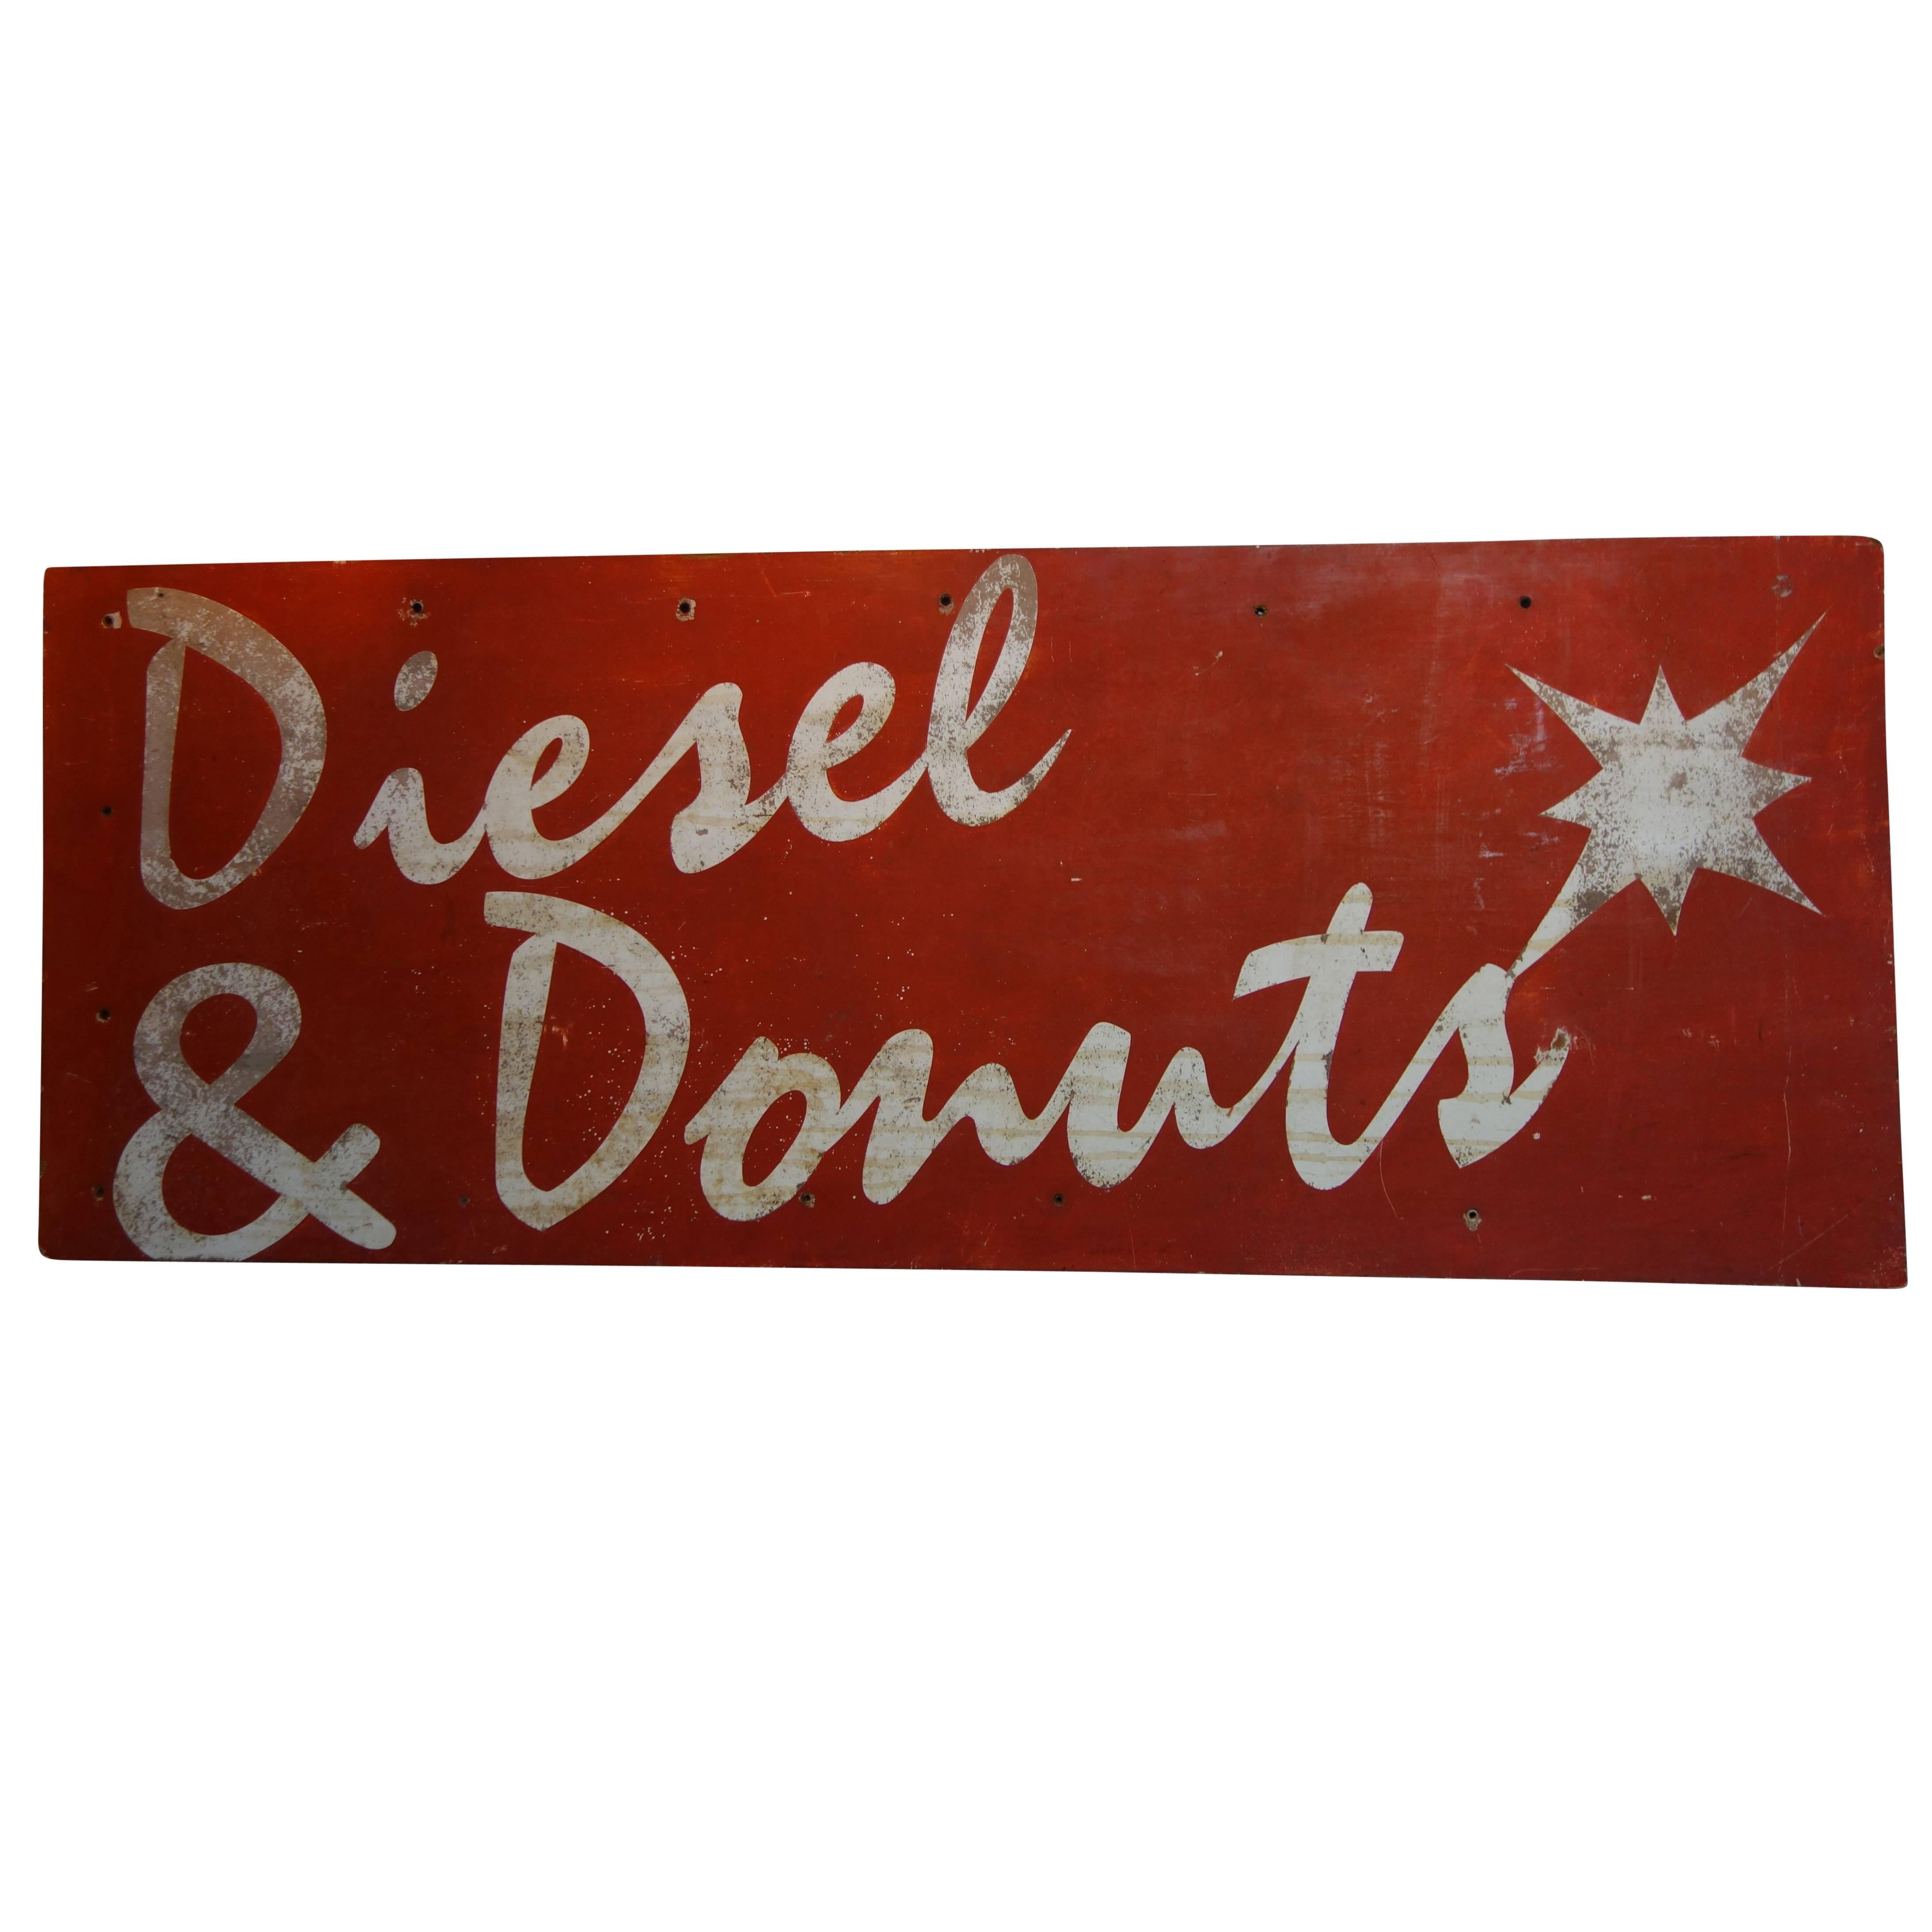 This is a fantastic hand-painted red and white wood sign advertising 